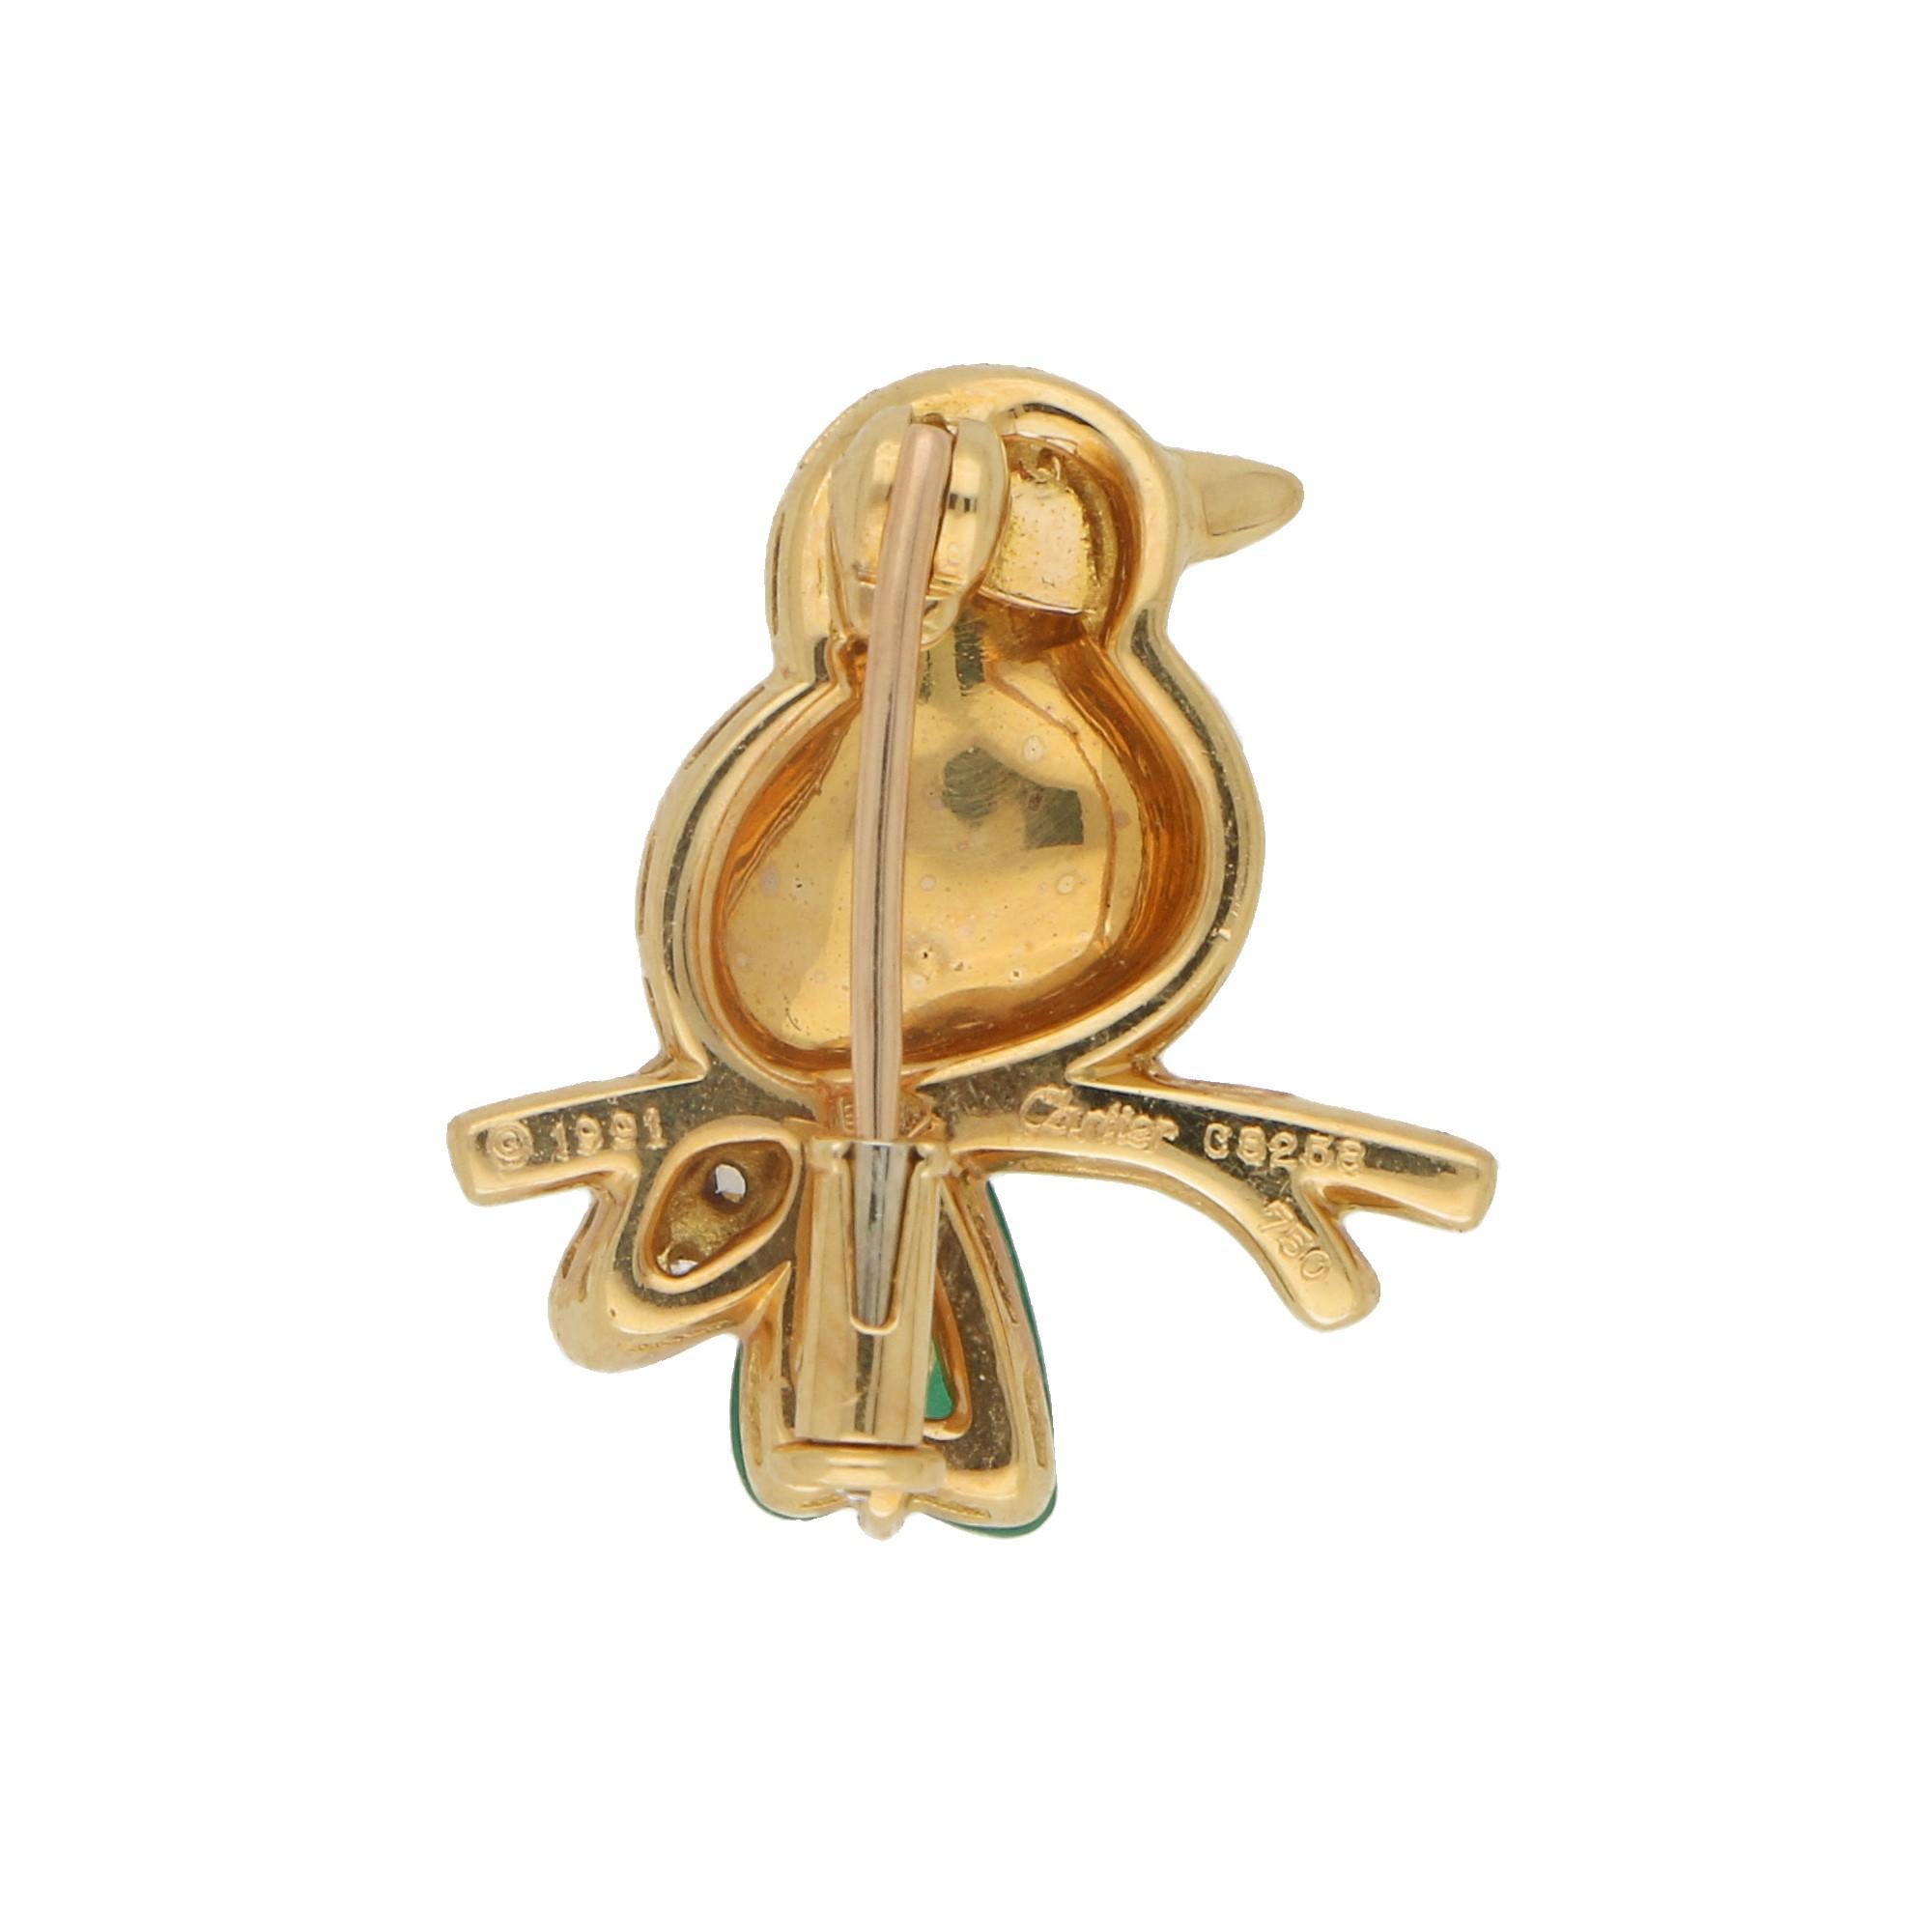 An adorable little Cartier bird pin/brooch set in 18k polished yellow gold. The pin depicts a sweet little bird perched on an onyx set branch. Its wing is set with exactly 12 round brilliant cut diamonds and a singular piece of carved chalcedony to